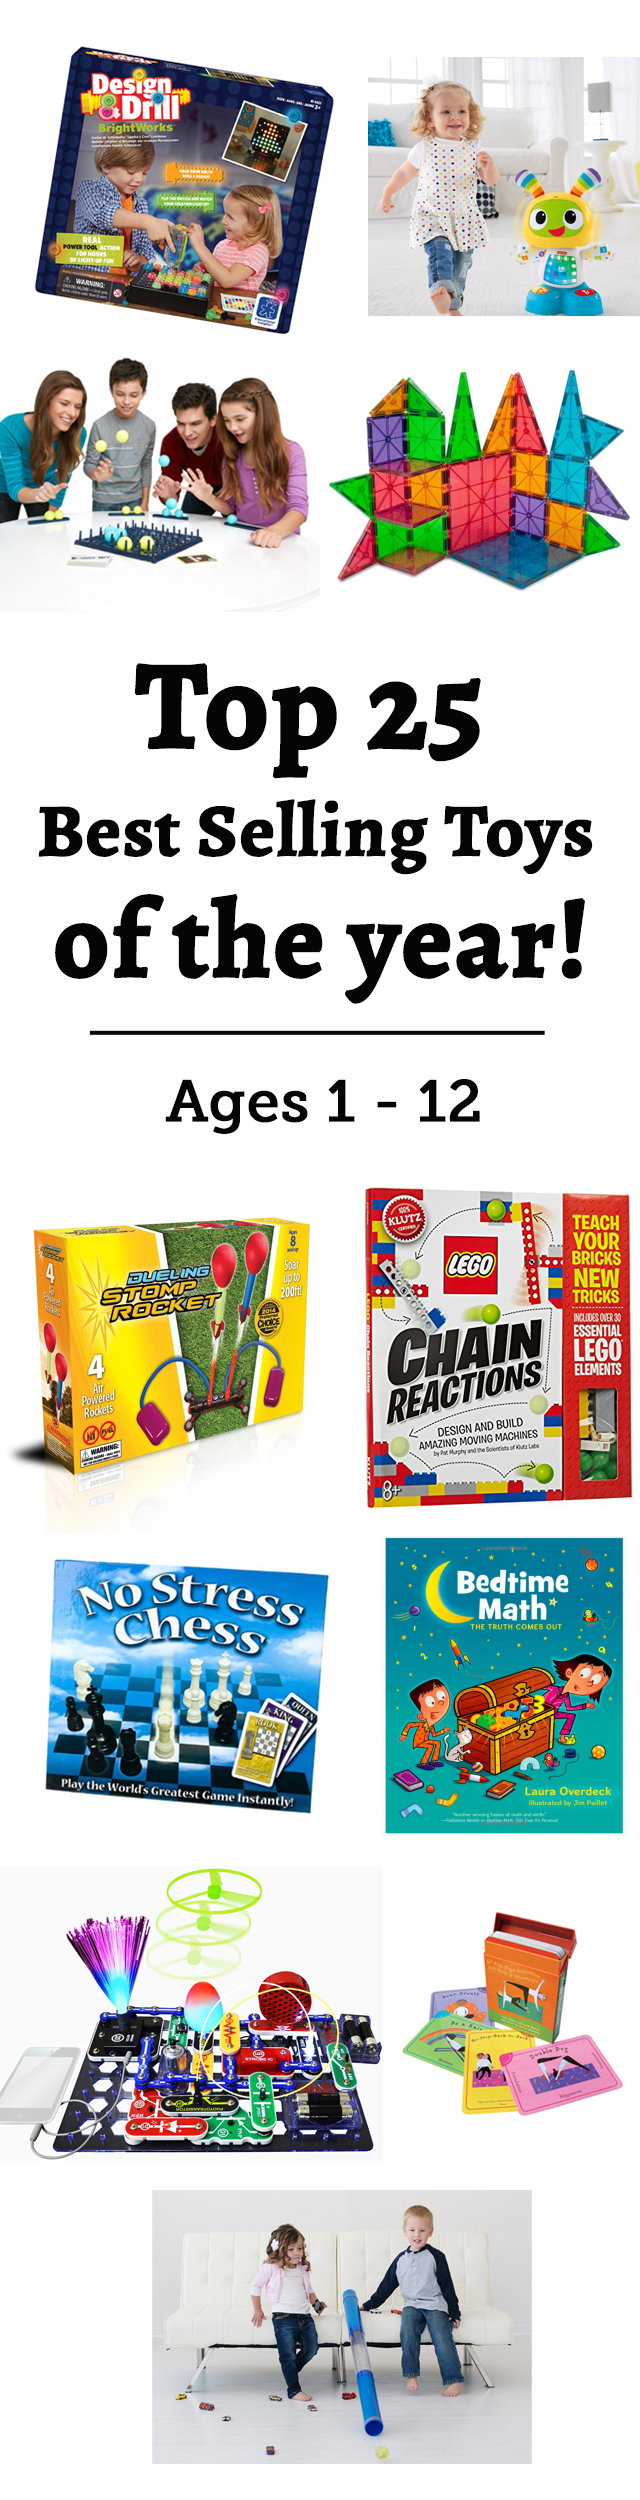 Best Selling Toys of 2015: The top toys for ages 1 to 12 from our famous gift guides